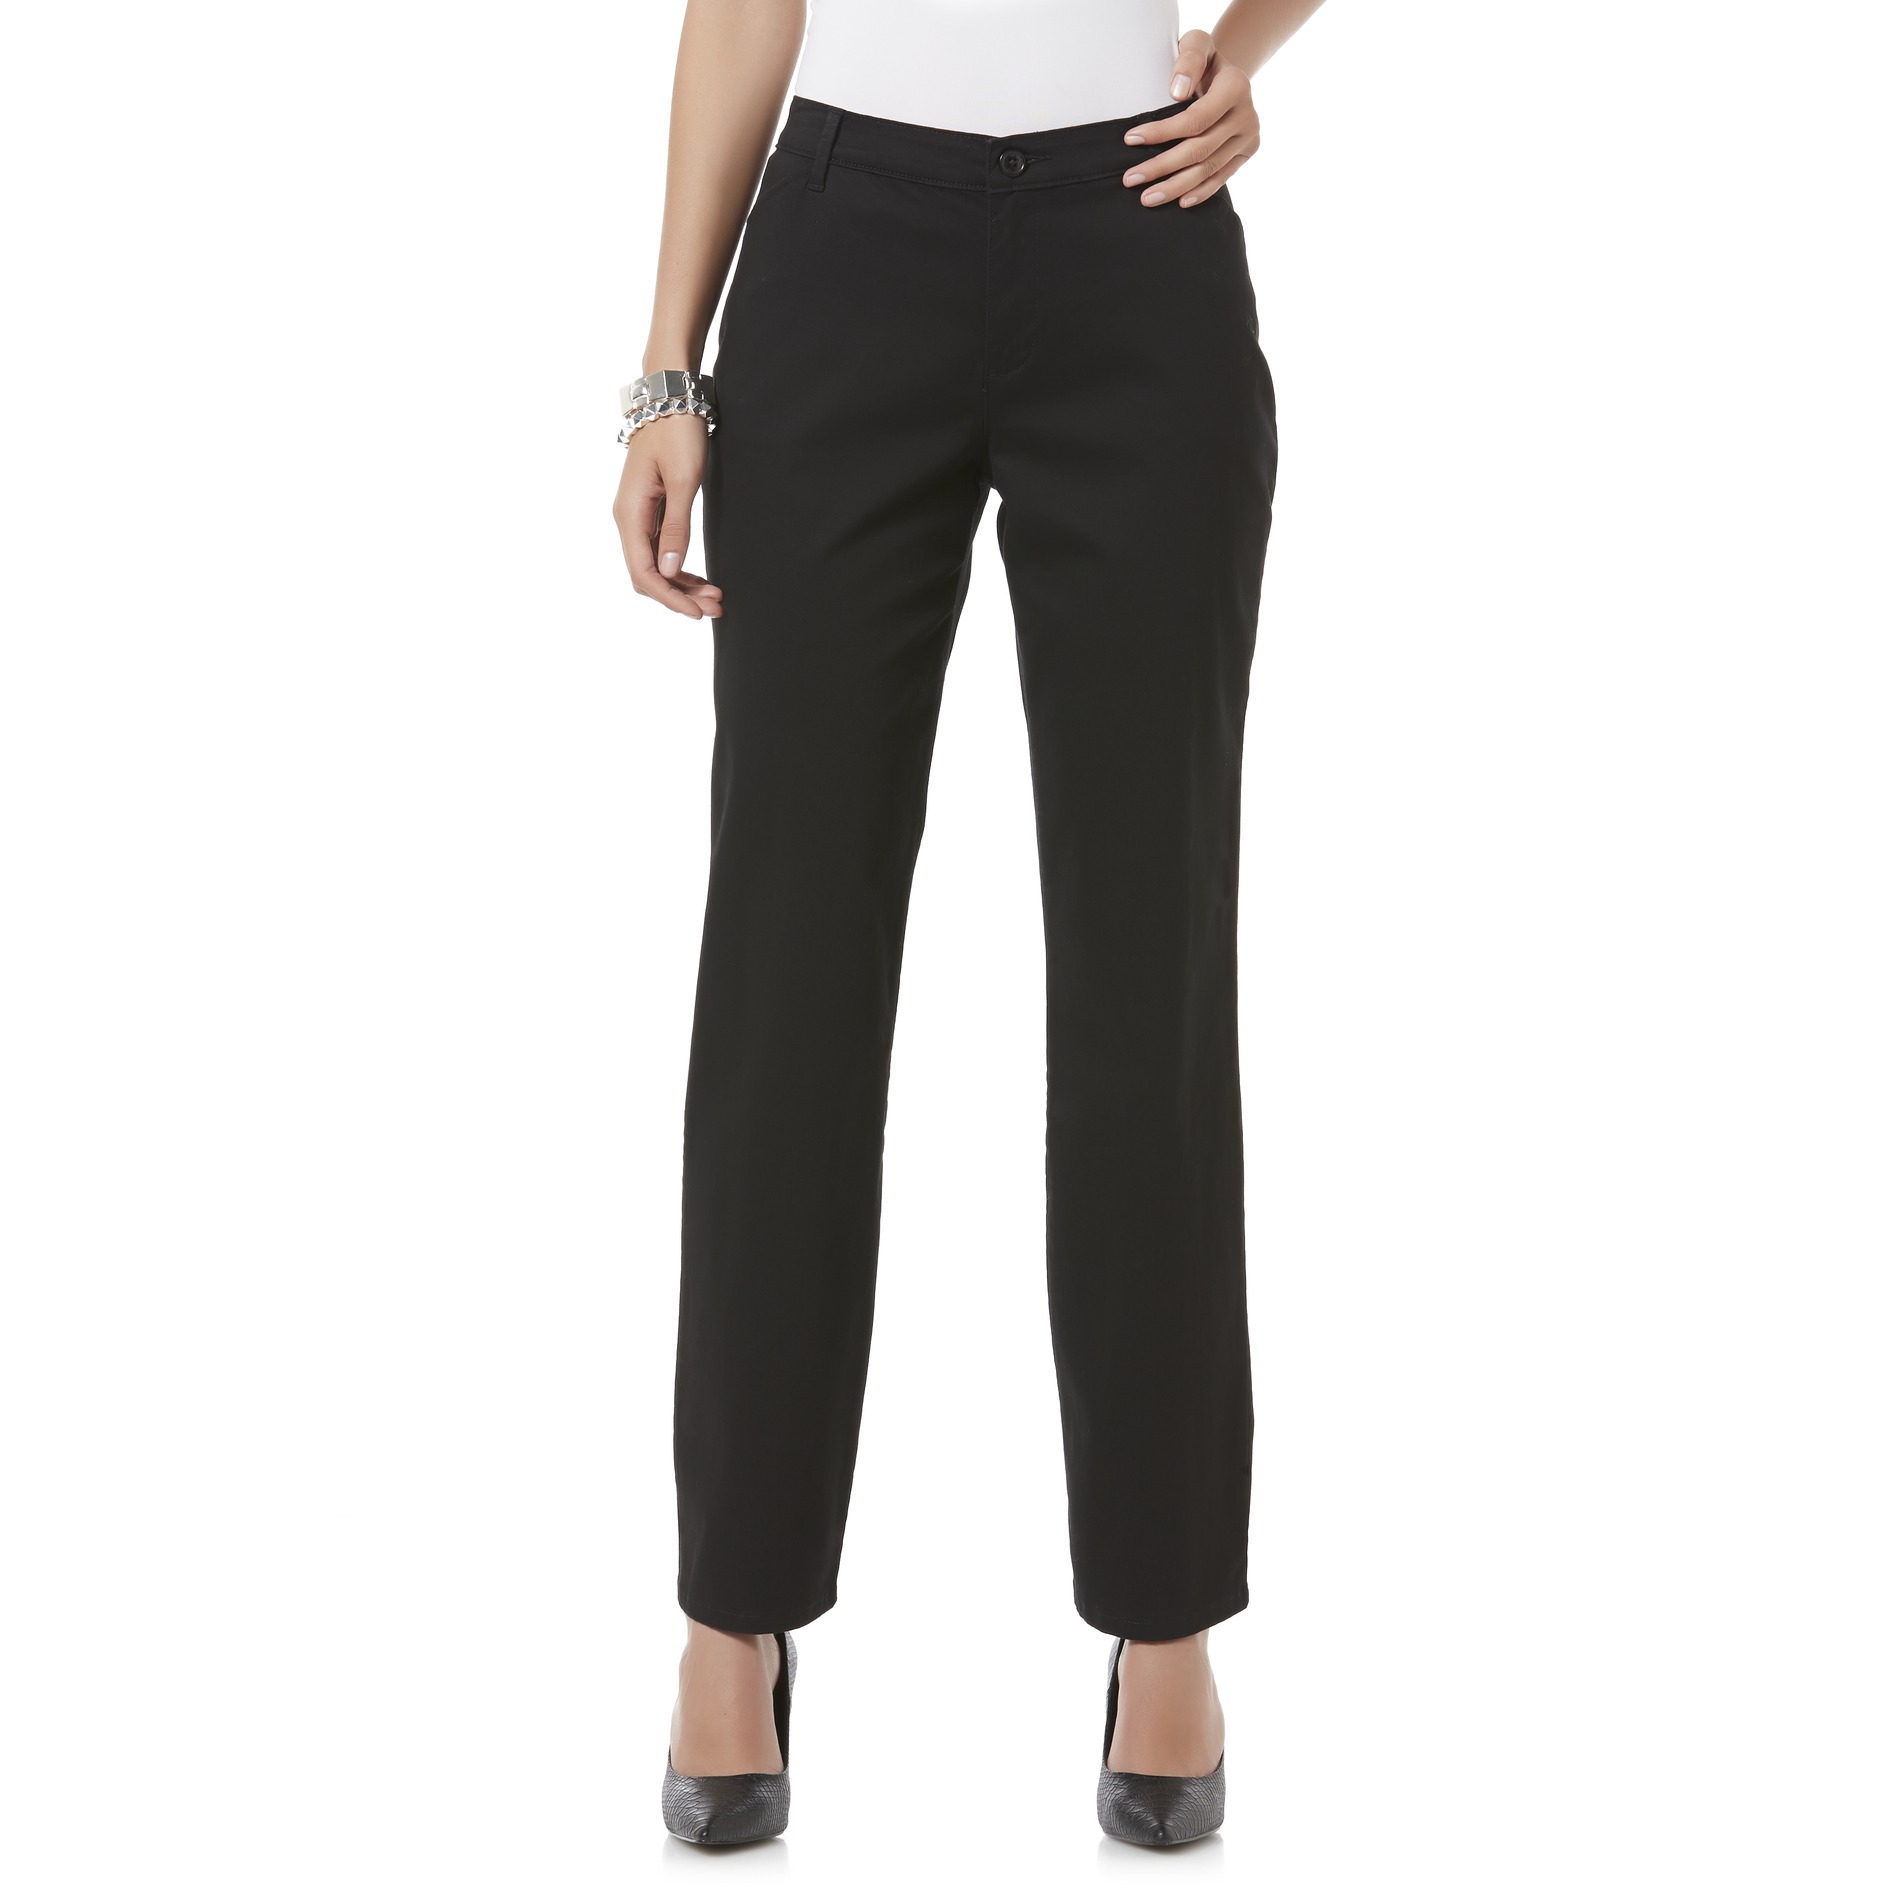 LEE Women's Relaxed-Fit All Day Workwear Knit Pants | Shop Your Way ...